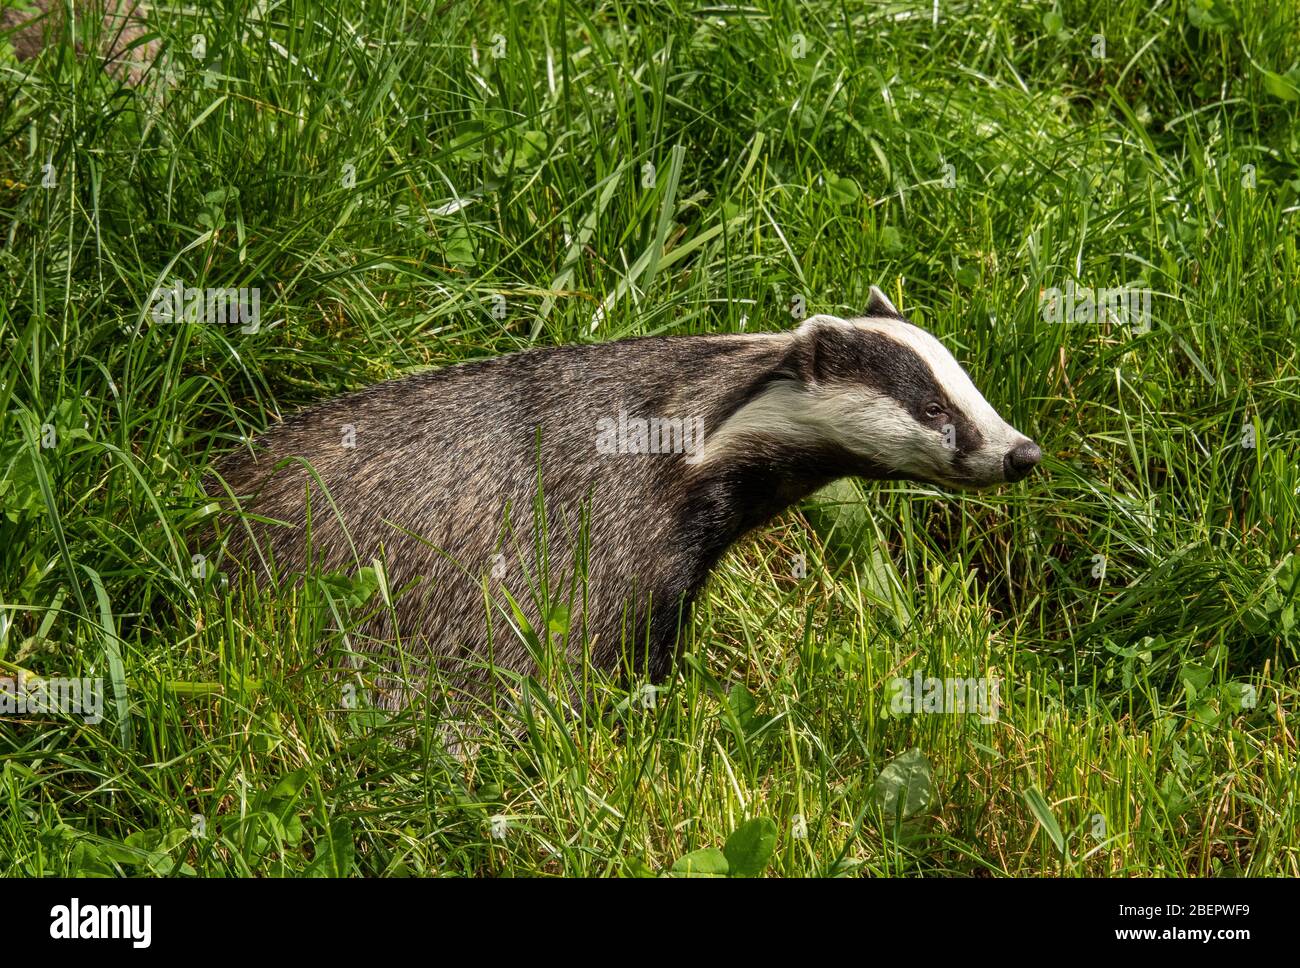 Badger foraging in grass Stock Photo